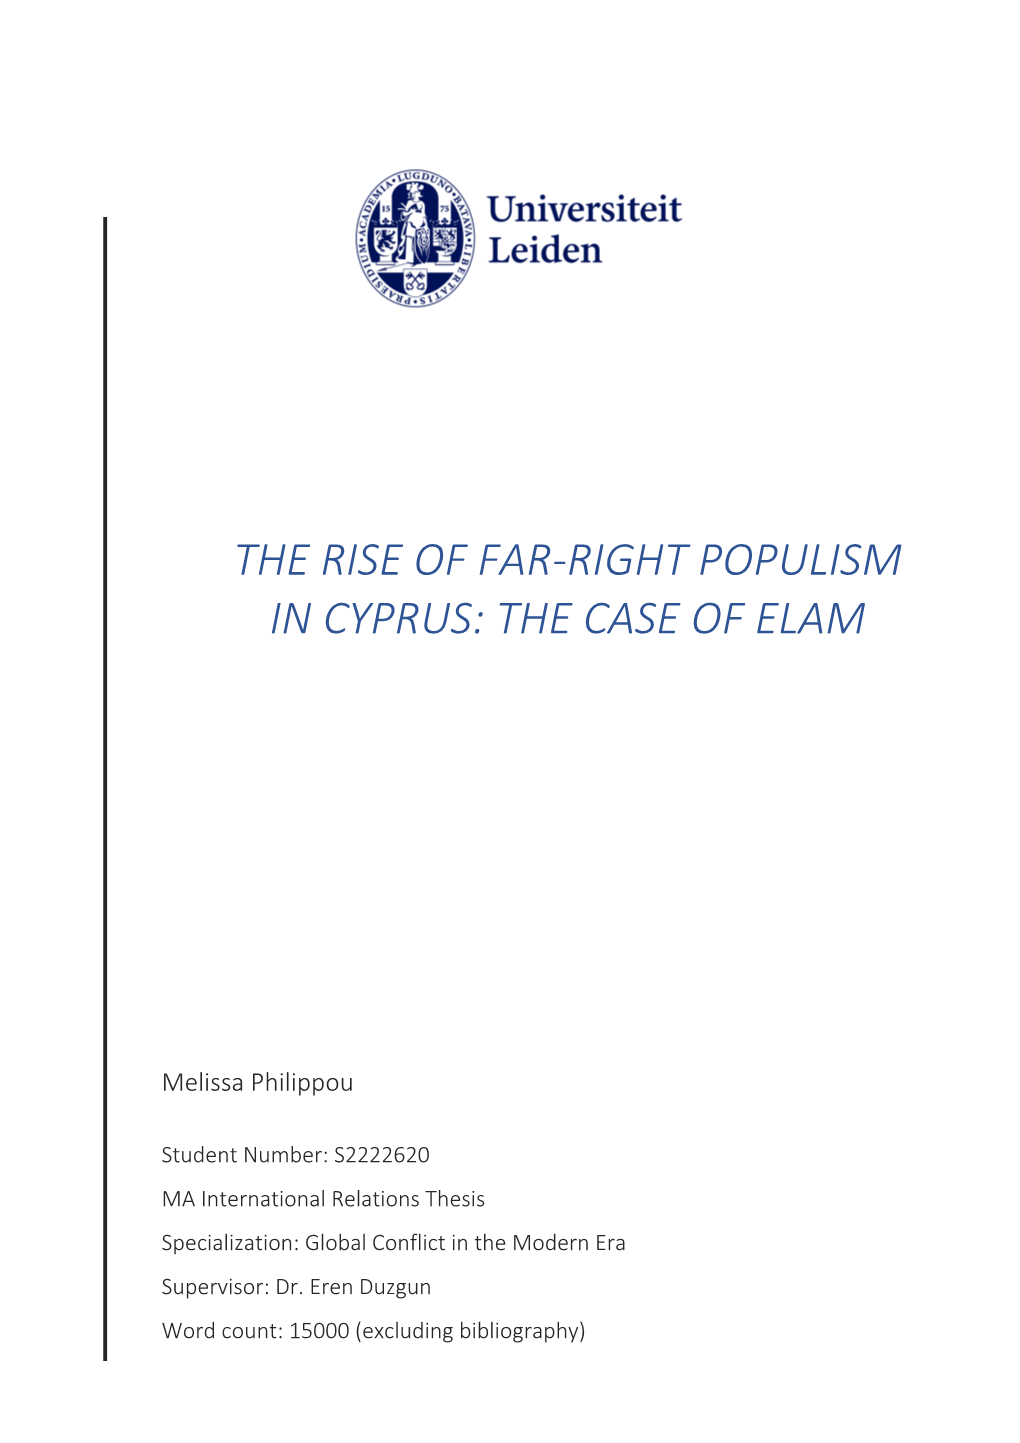 The Rise of Far-Right Populism in Cyprus: the Case of Elam